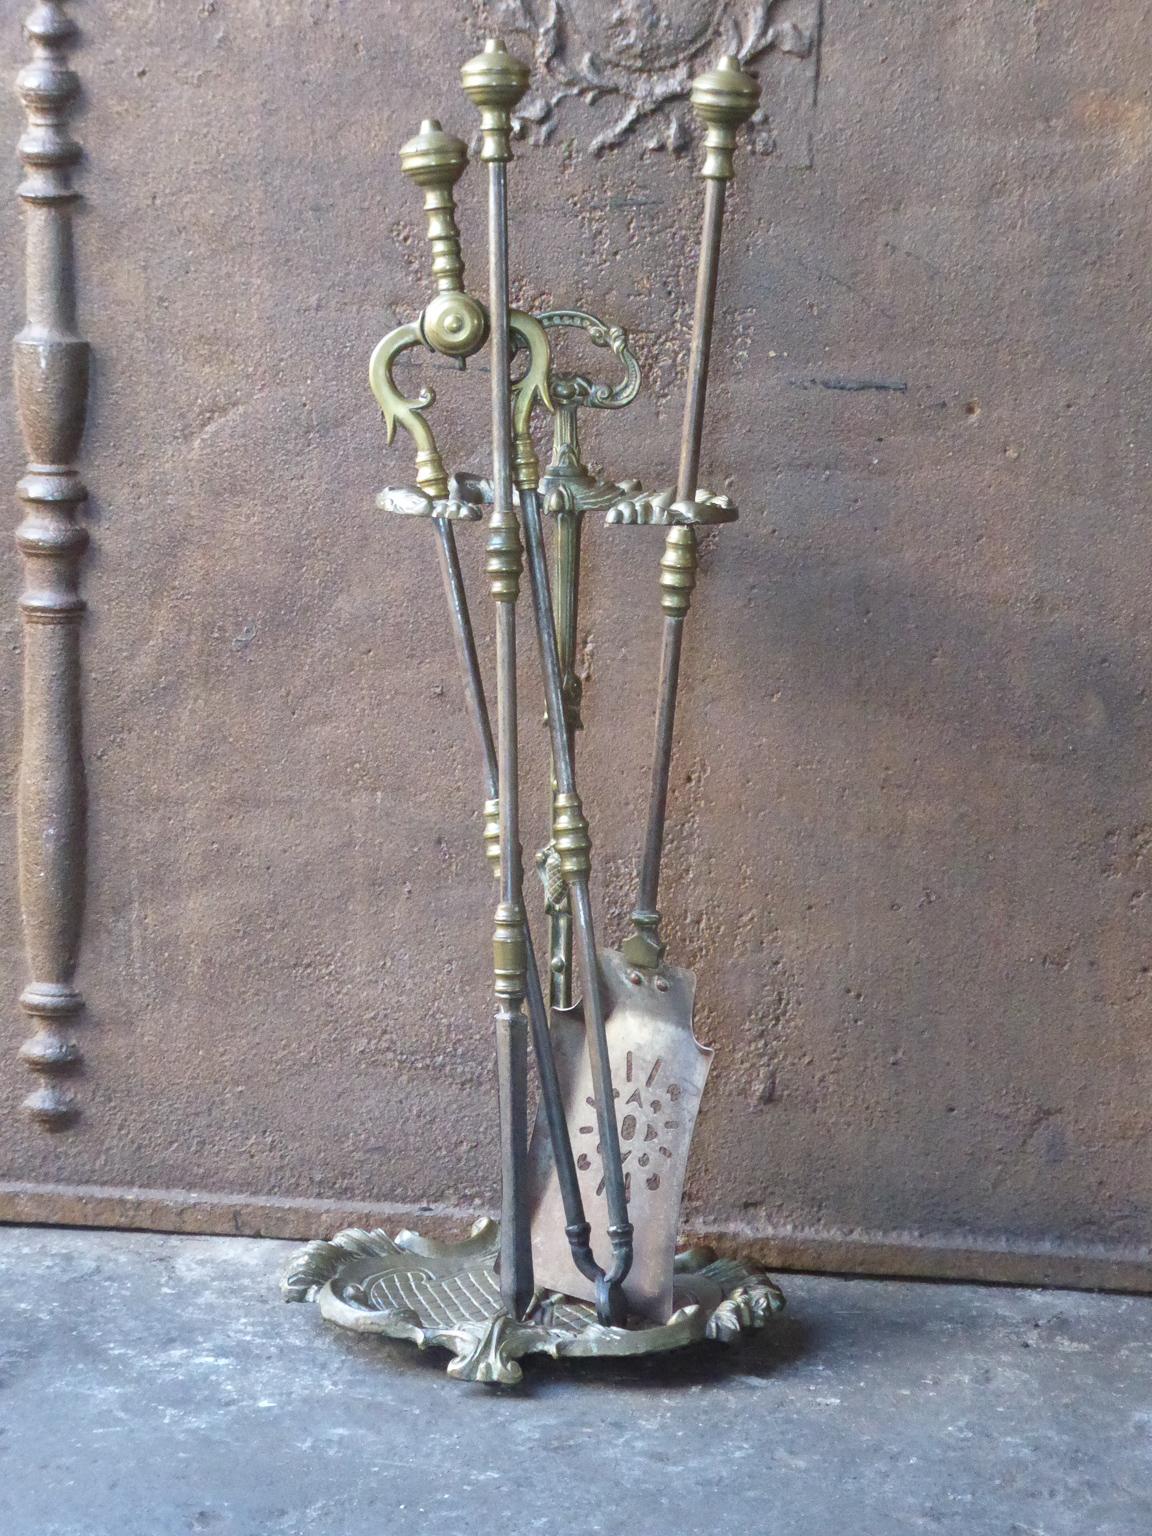 An elegant set of three tools with ring-banded shafts and round knopped finial handles. The companion set of fire irons is made of wrought iron and brass. It is in a good condition and is fully functional.